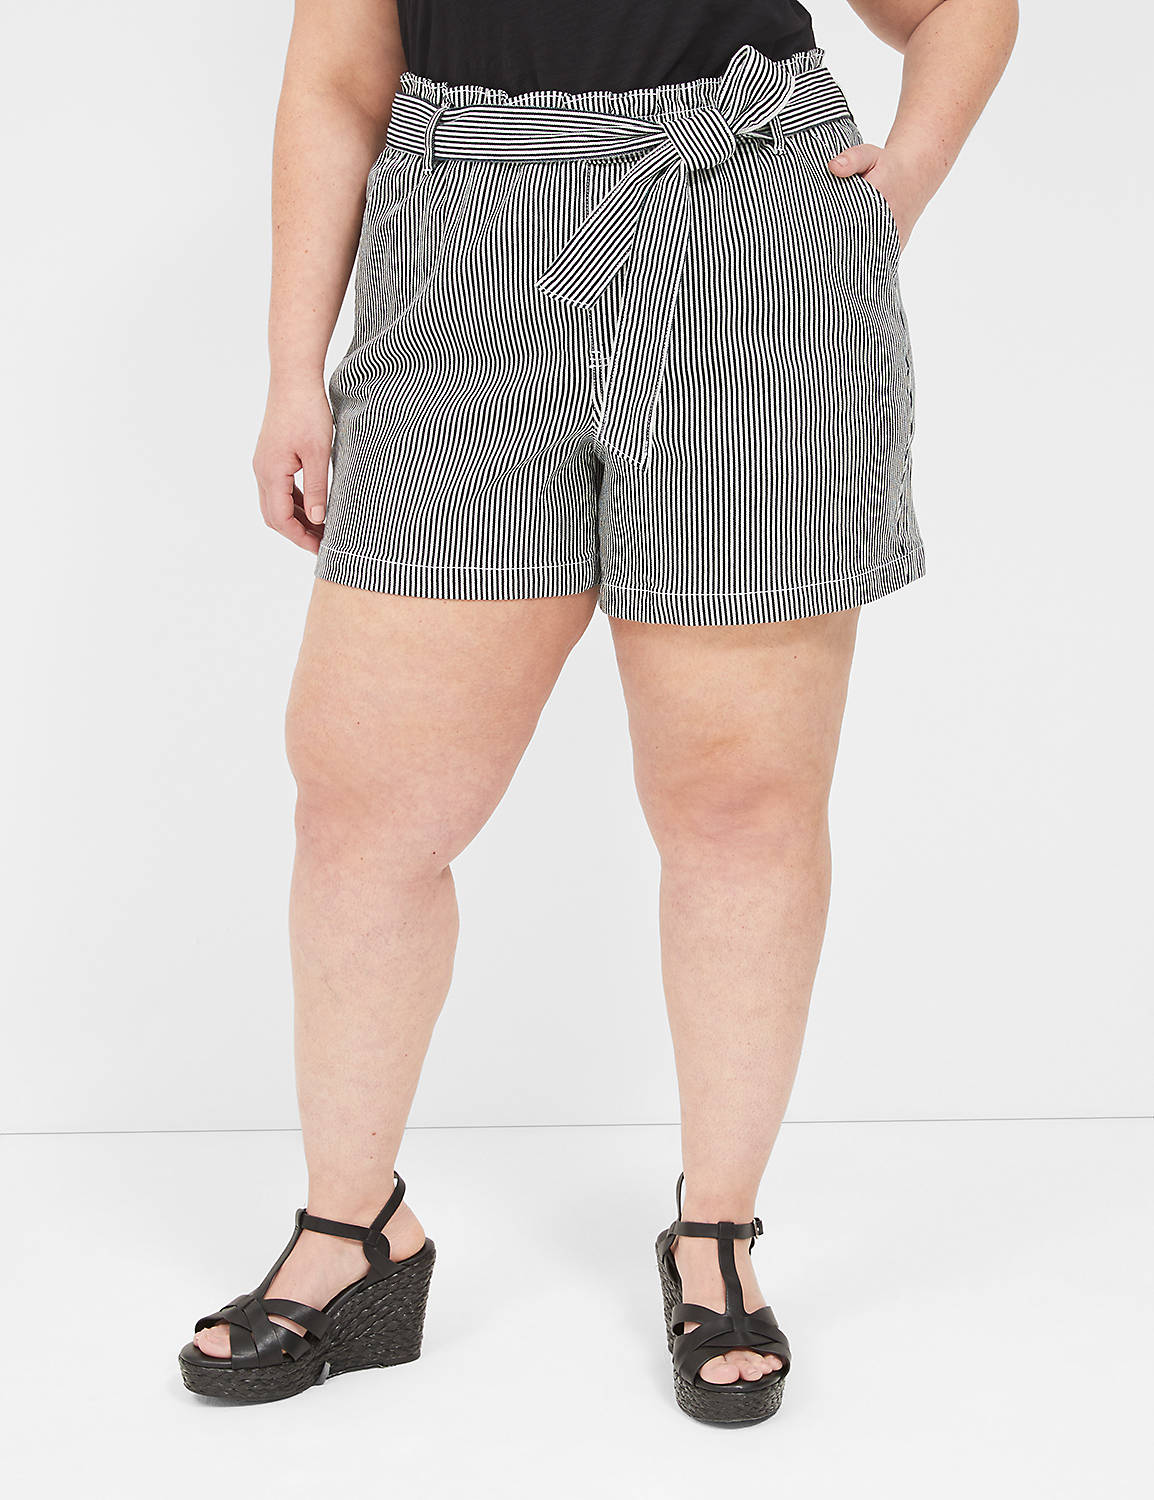 *HIGH RISE BELTED BERMUDA SHORT - B Product Image 1